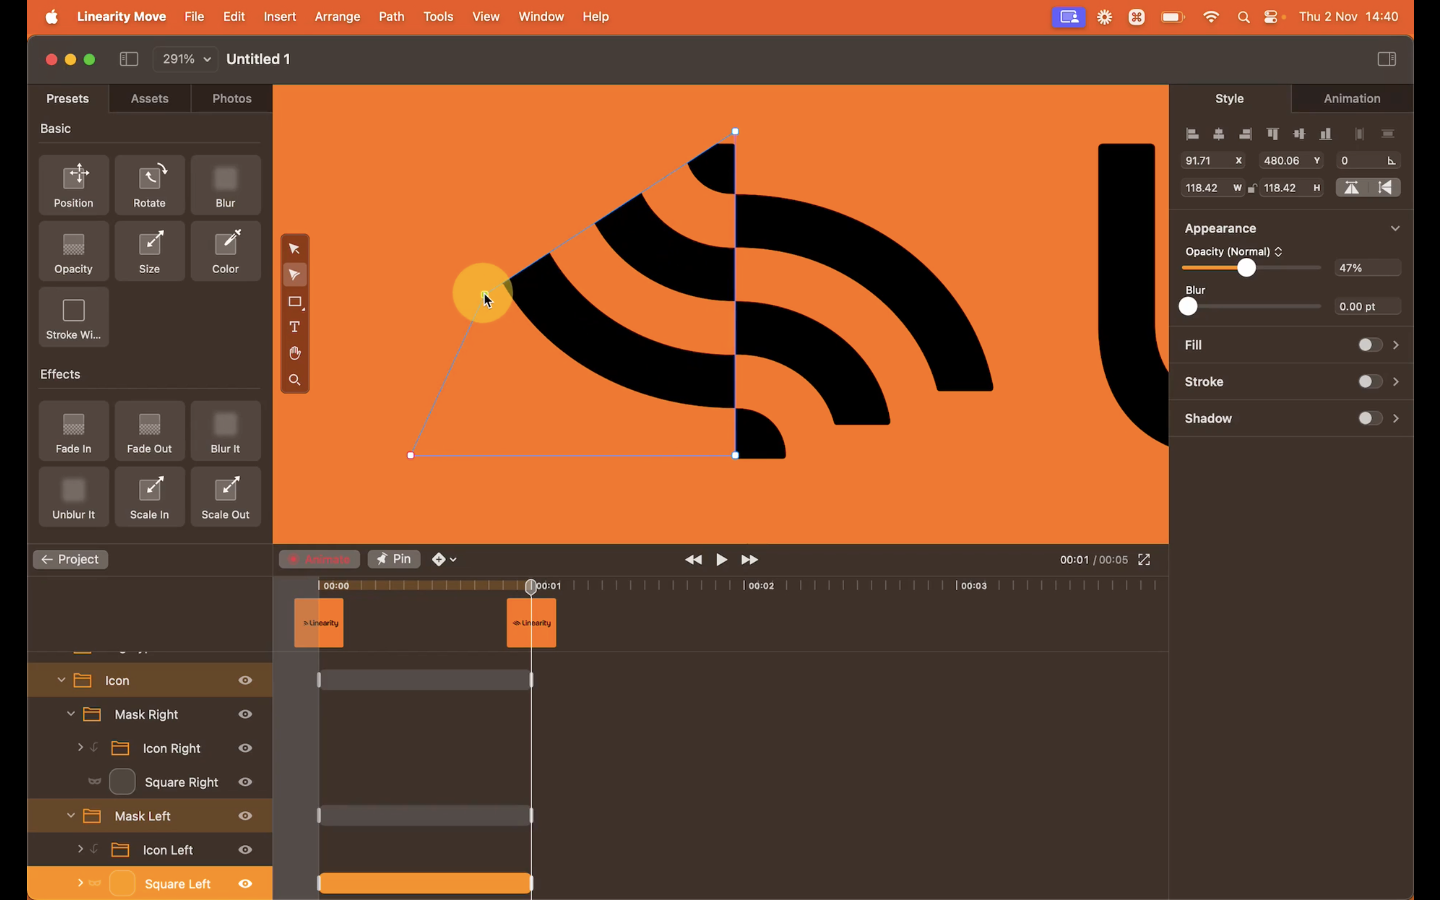 How to animate a logo + linearity + animate masks